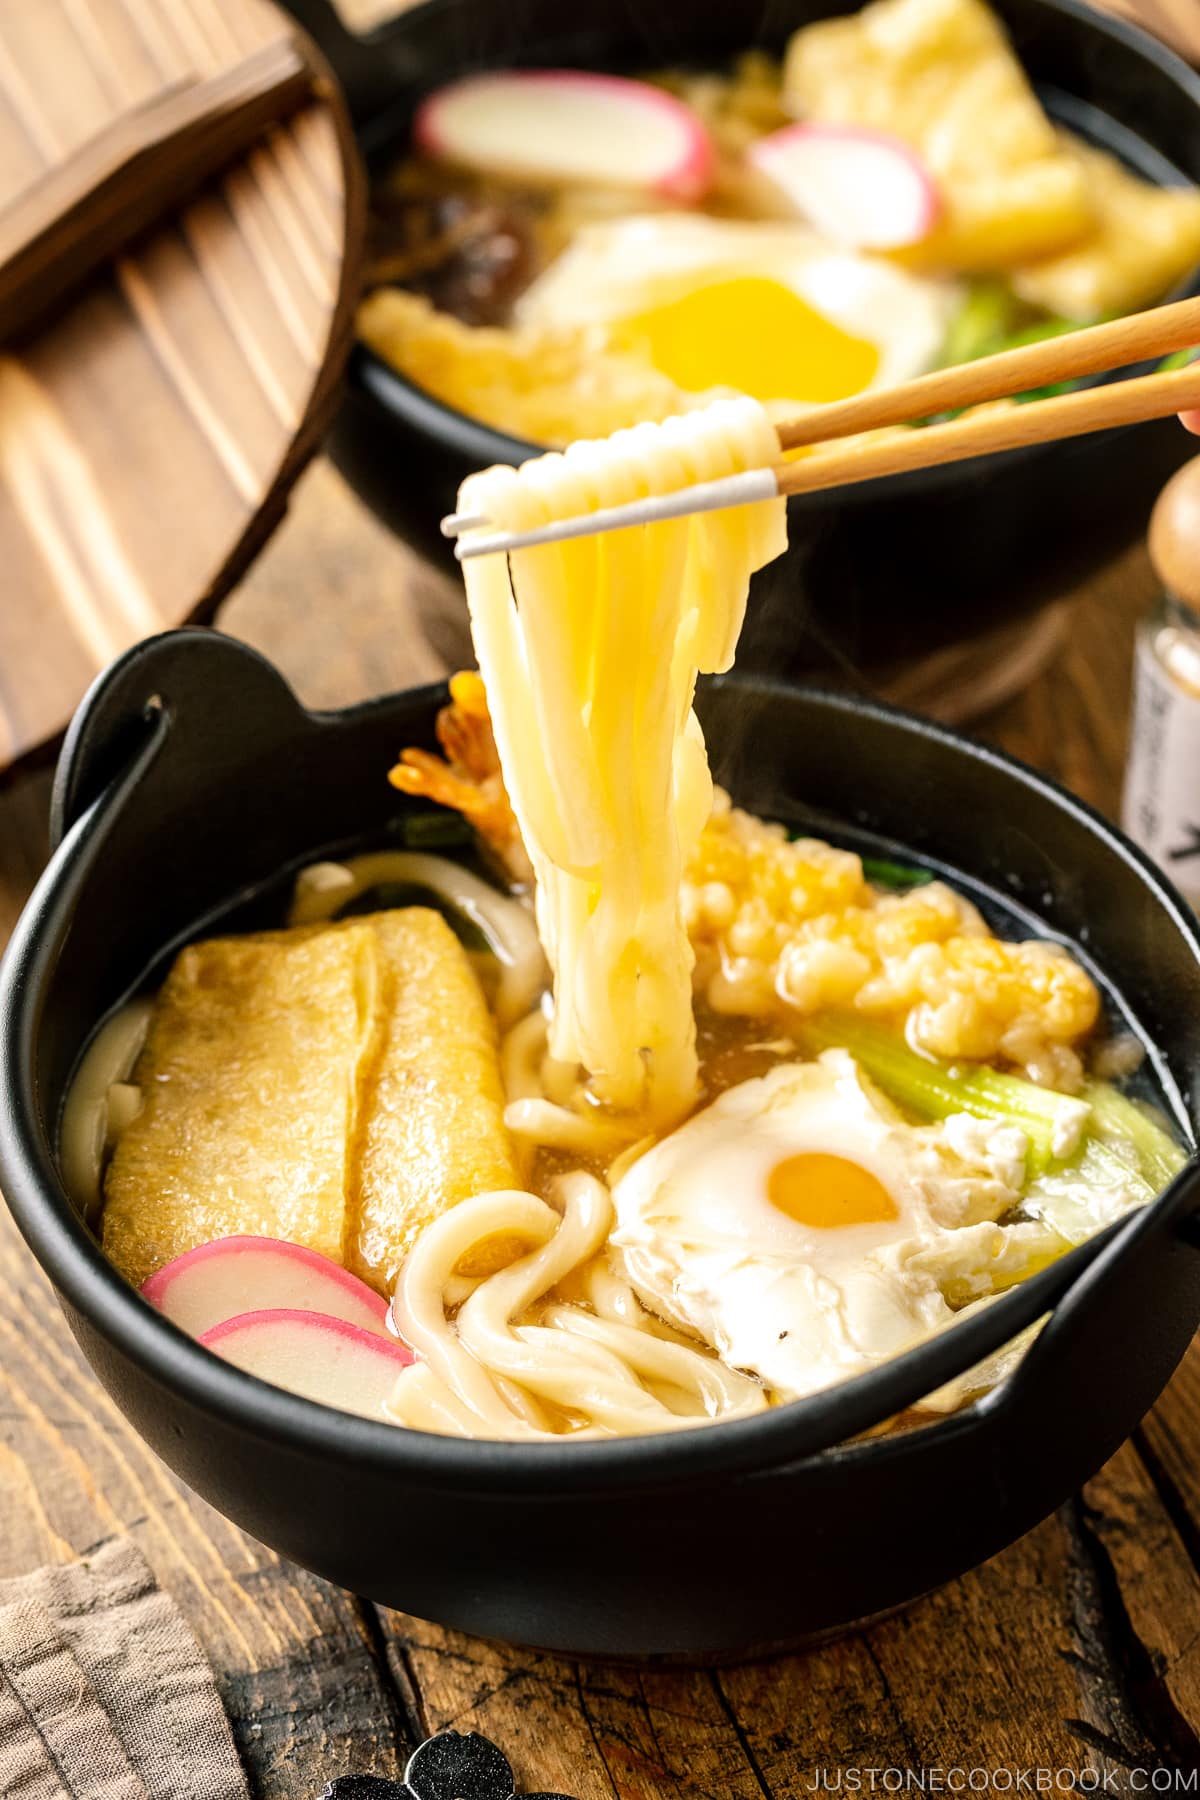 An individual cast iron pot containing Nabeyaki Udon, which is made of udon noodles, kamaboko fish cake, fried tofu, egg cooked in a dashi broth and topped with shrimp tempura.